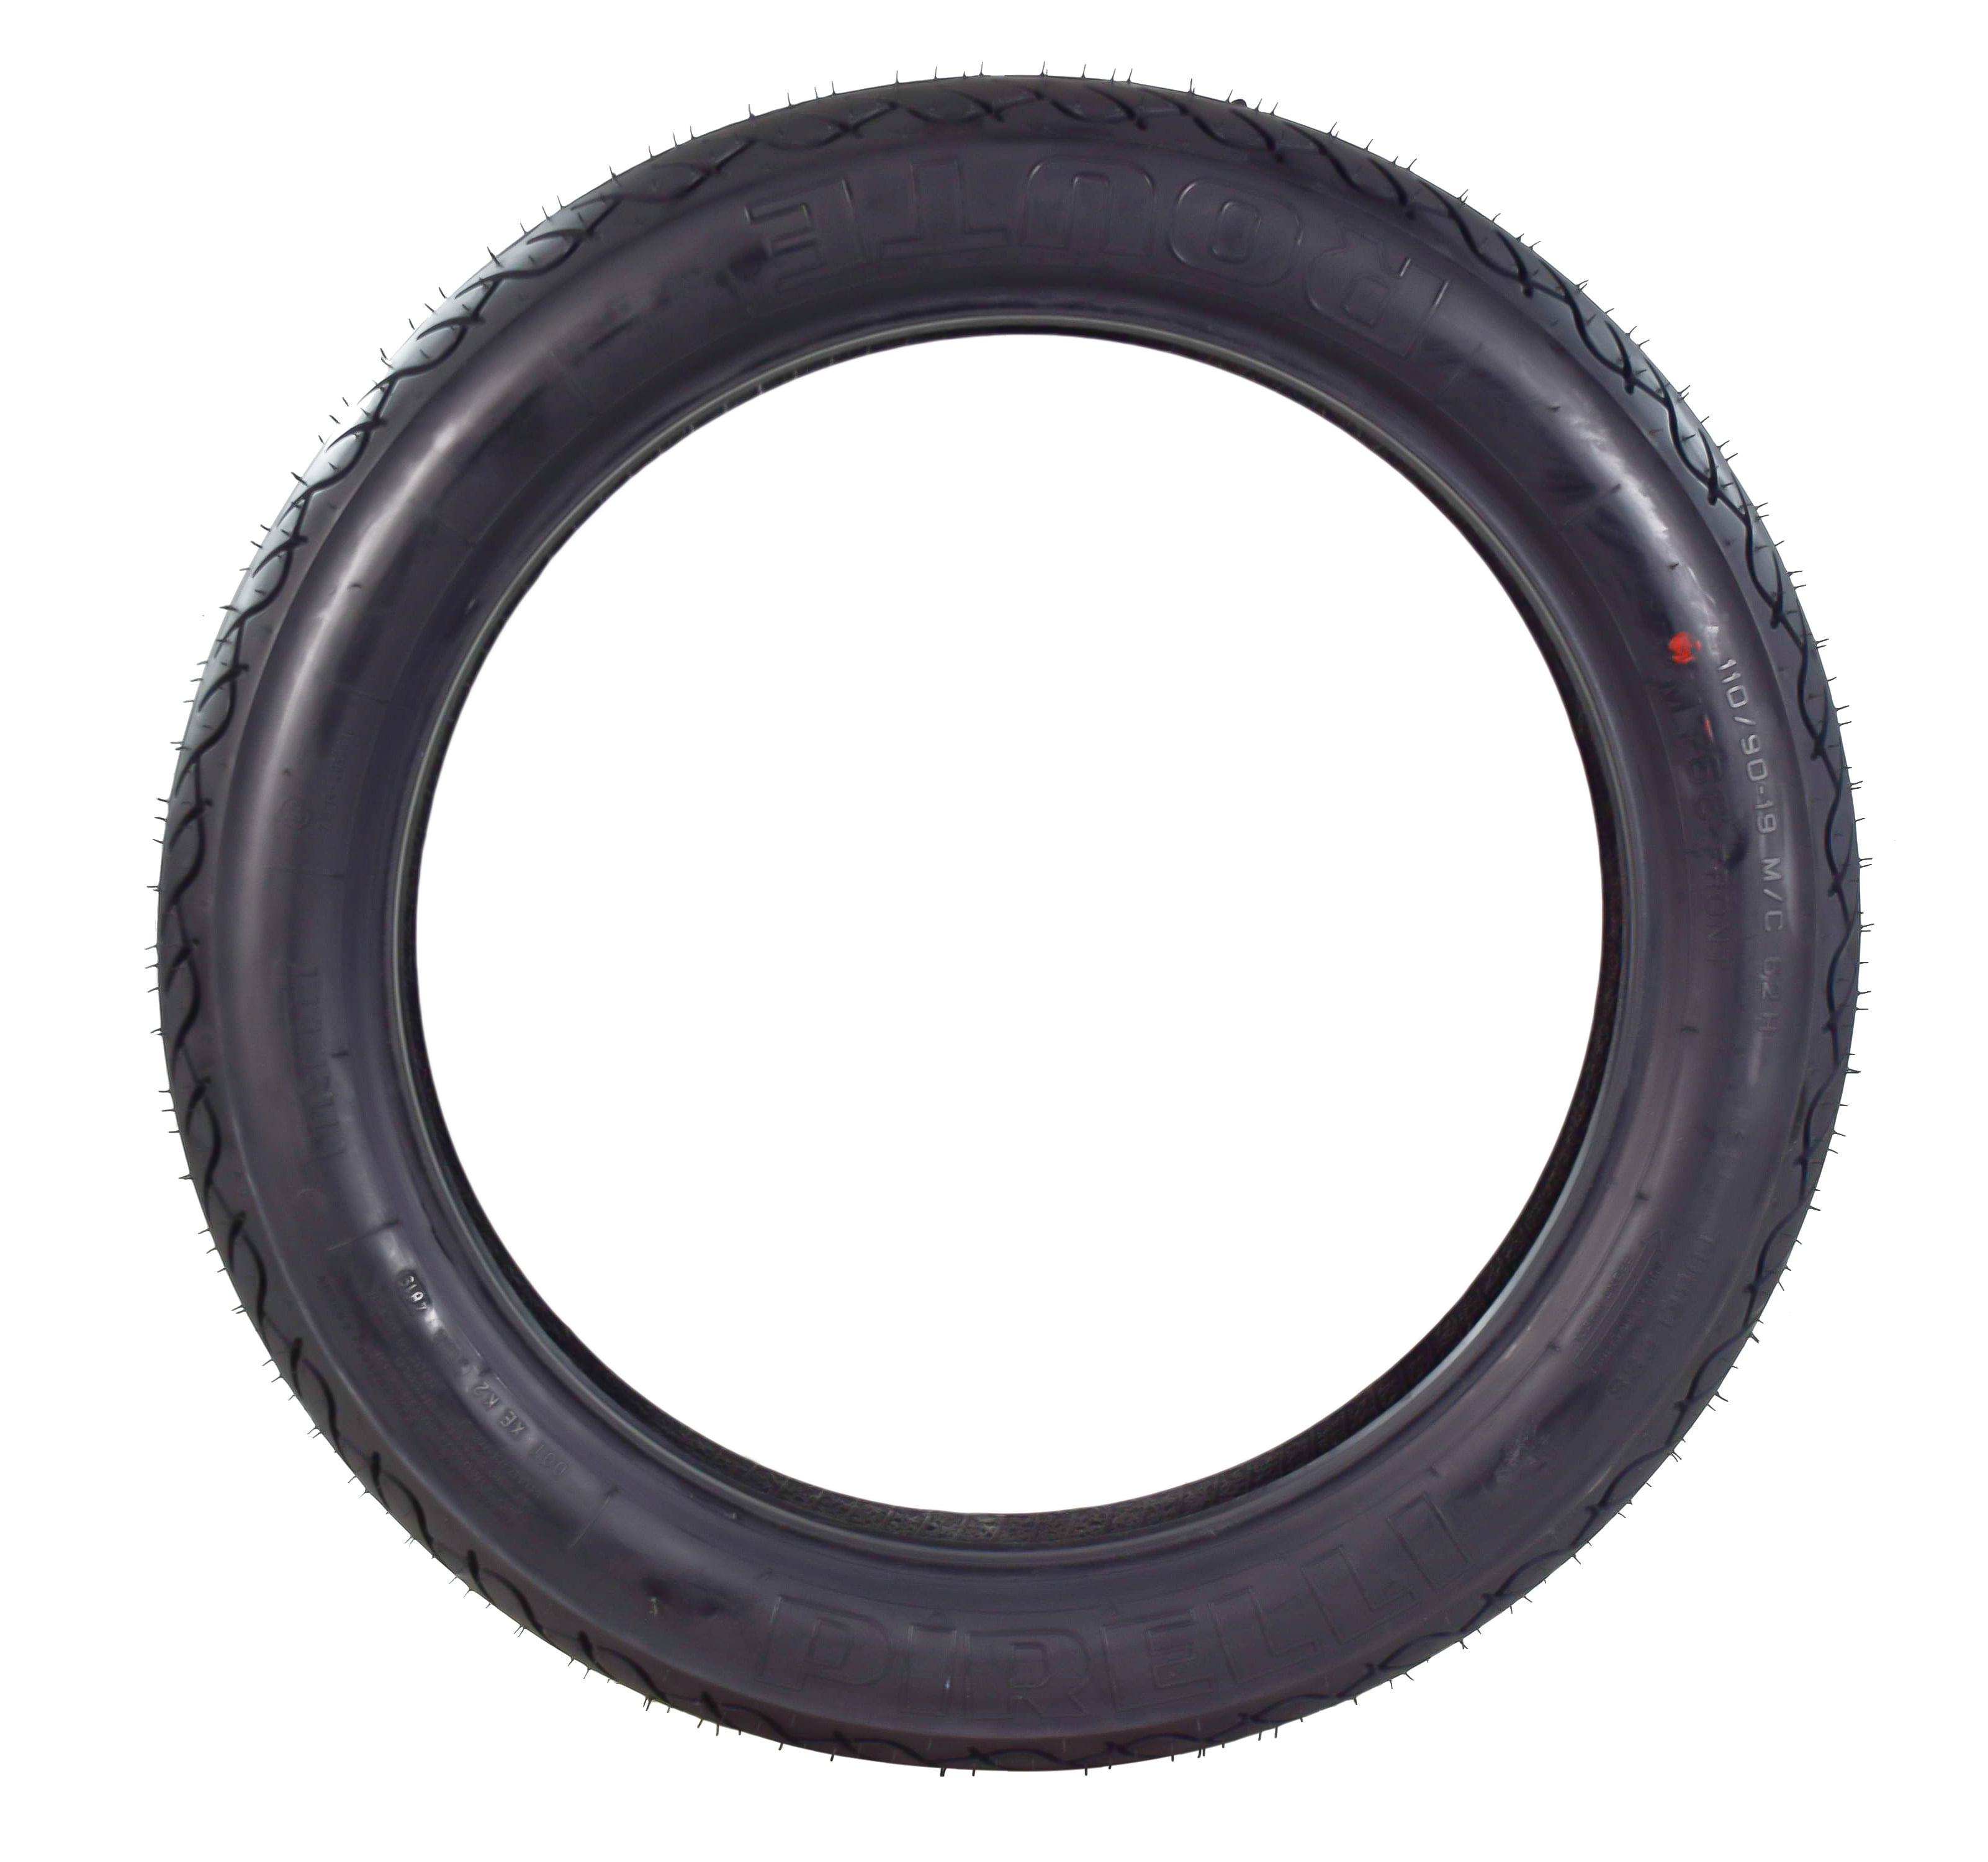 100/90-19 Pirelli MT 66 Route Tubeless Front Tire